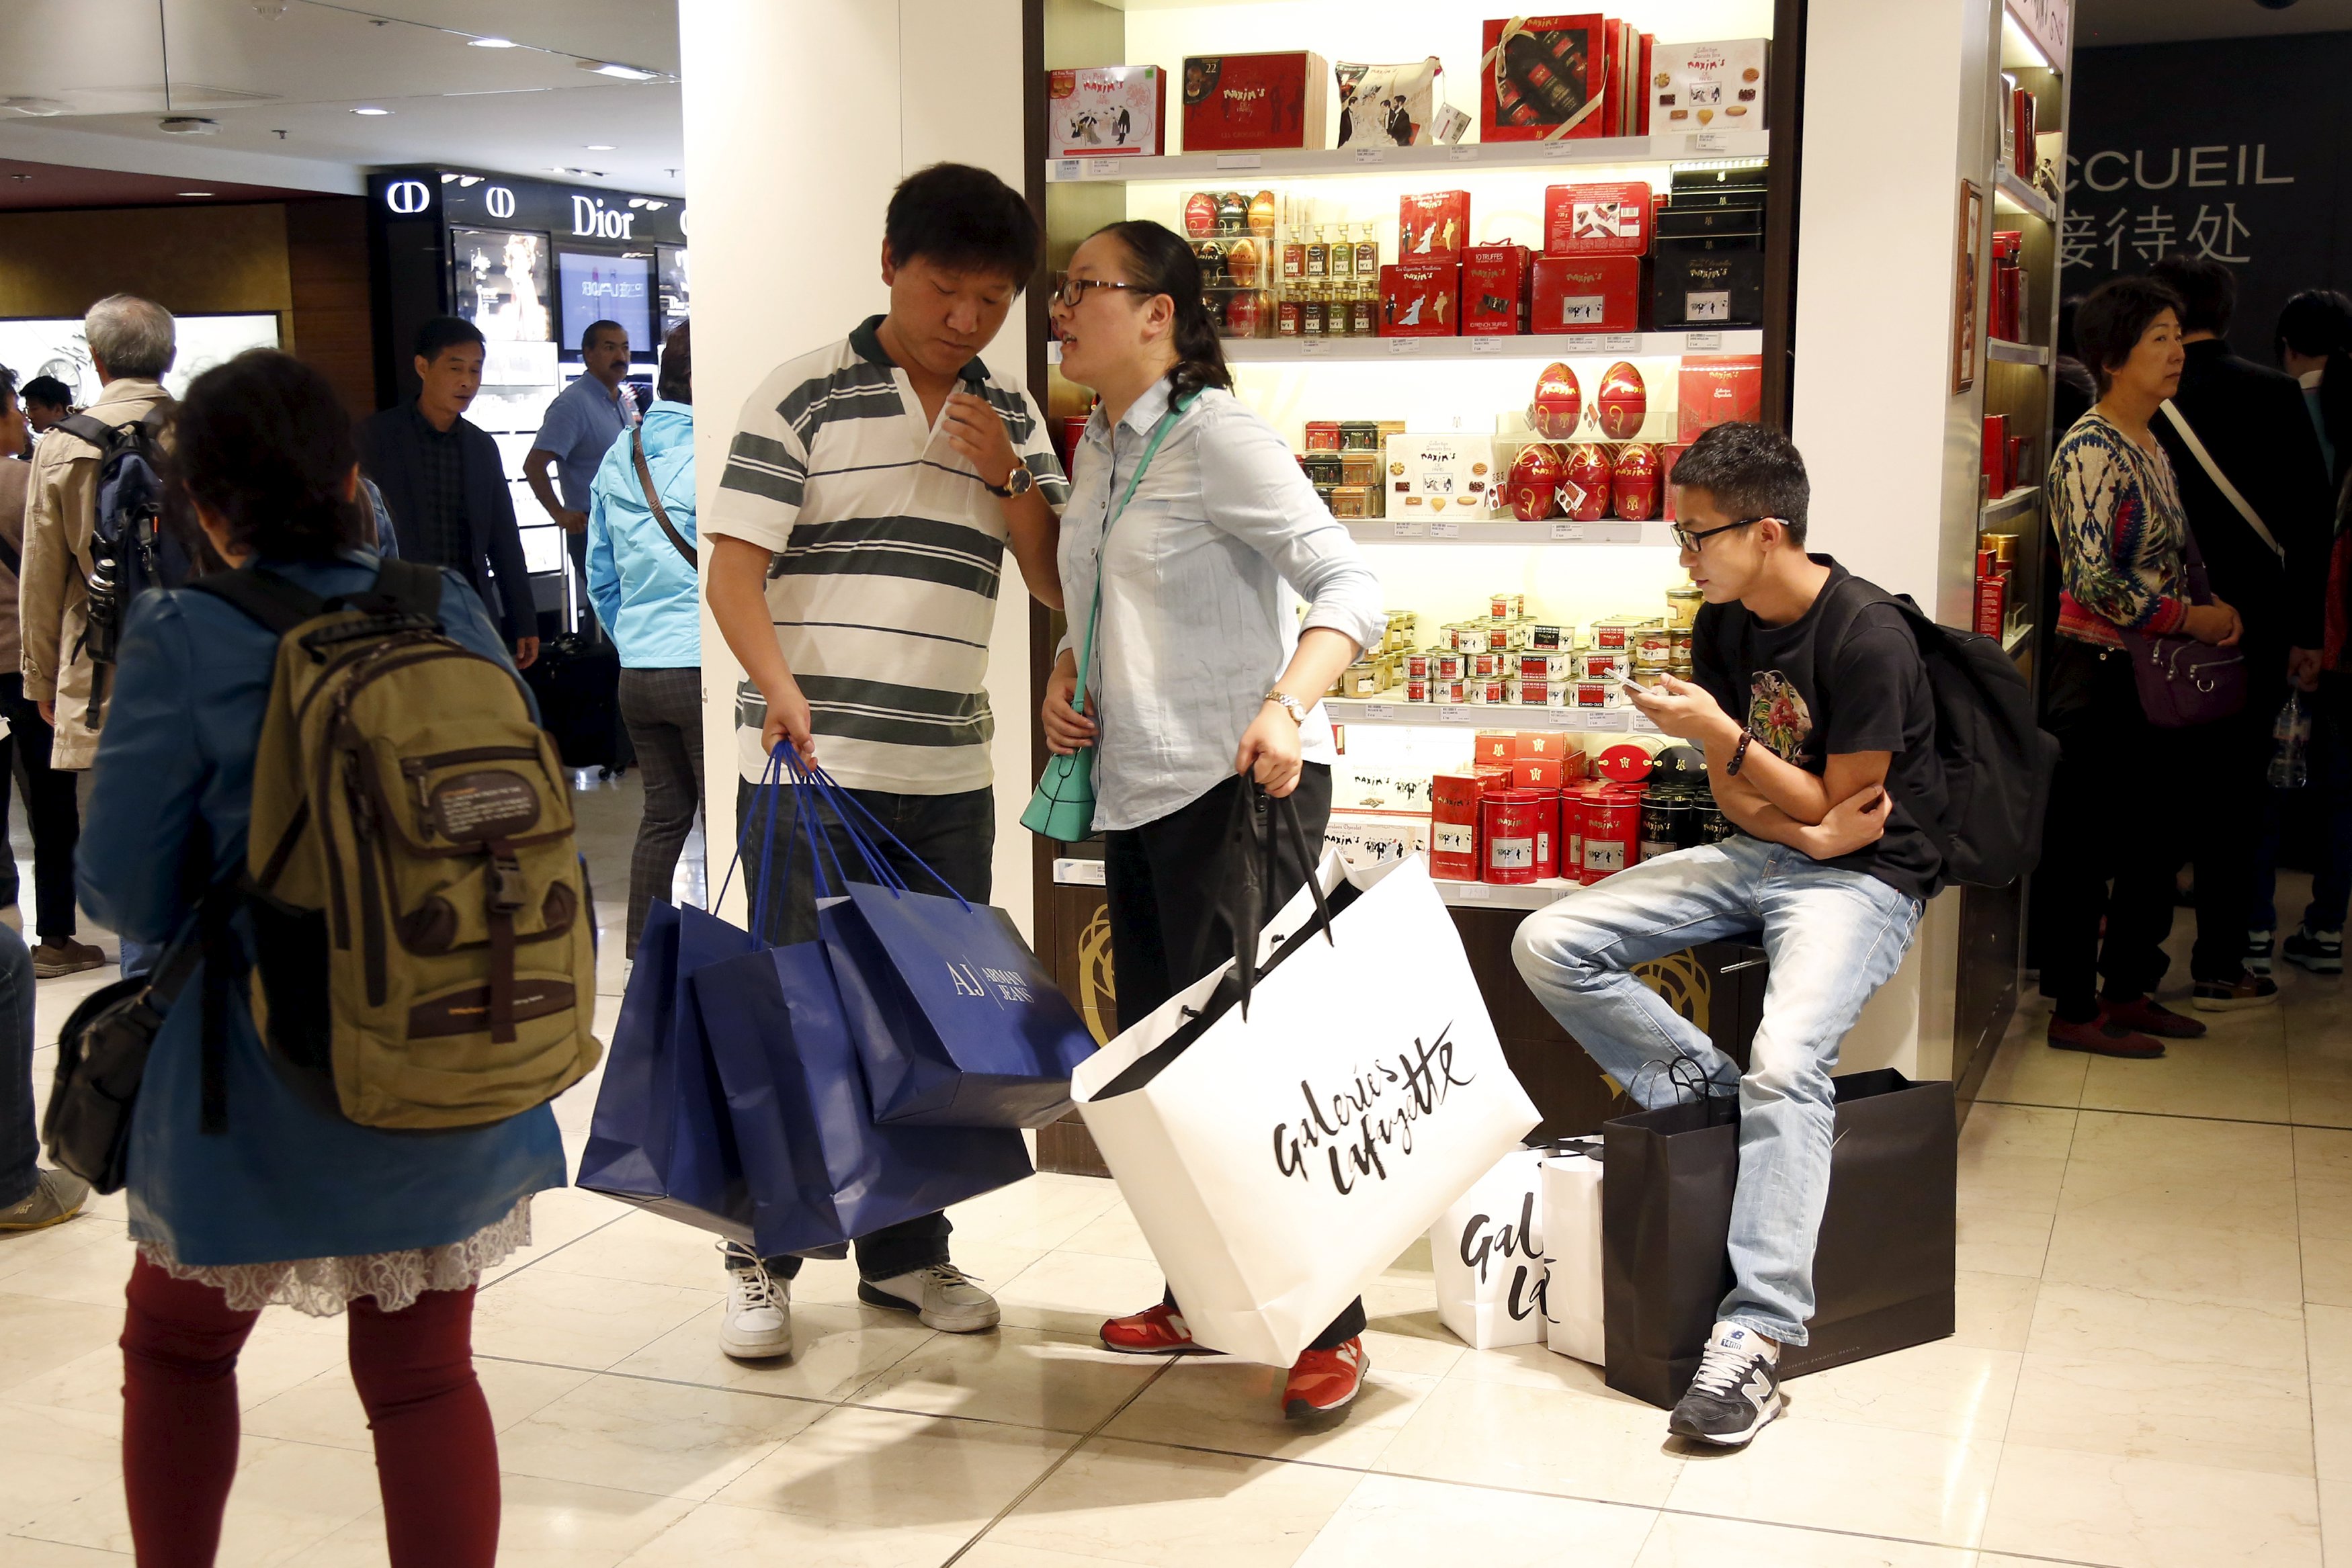 Customers visit the Galeries Lafayette department store in Paris, France, September 23, 2015. Chinese luxury consumers are spending more on ready-to-wear and new labels, a notable shift in the behaviour and tastes of the world's top spenders, a Reuters survey of retailers in the United States, Asia and Europe showed. Analysts estimate more than two thirds of luxury purchases by Chinese buyers is done overseas, mainly in shopping hotspots such as Paris, Milan, London, New York and Tokyo, which can offer savings of more than 50 percent compared with China prices thanks to foreign exchange rates, tax refunds and other discounts. To Match Insight LUXURY-CHINA/ Picture taken September 23, 2015. REUTERS/Charles Platiau